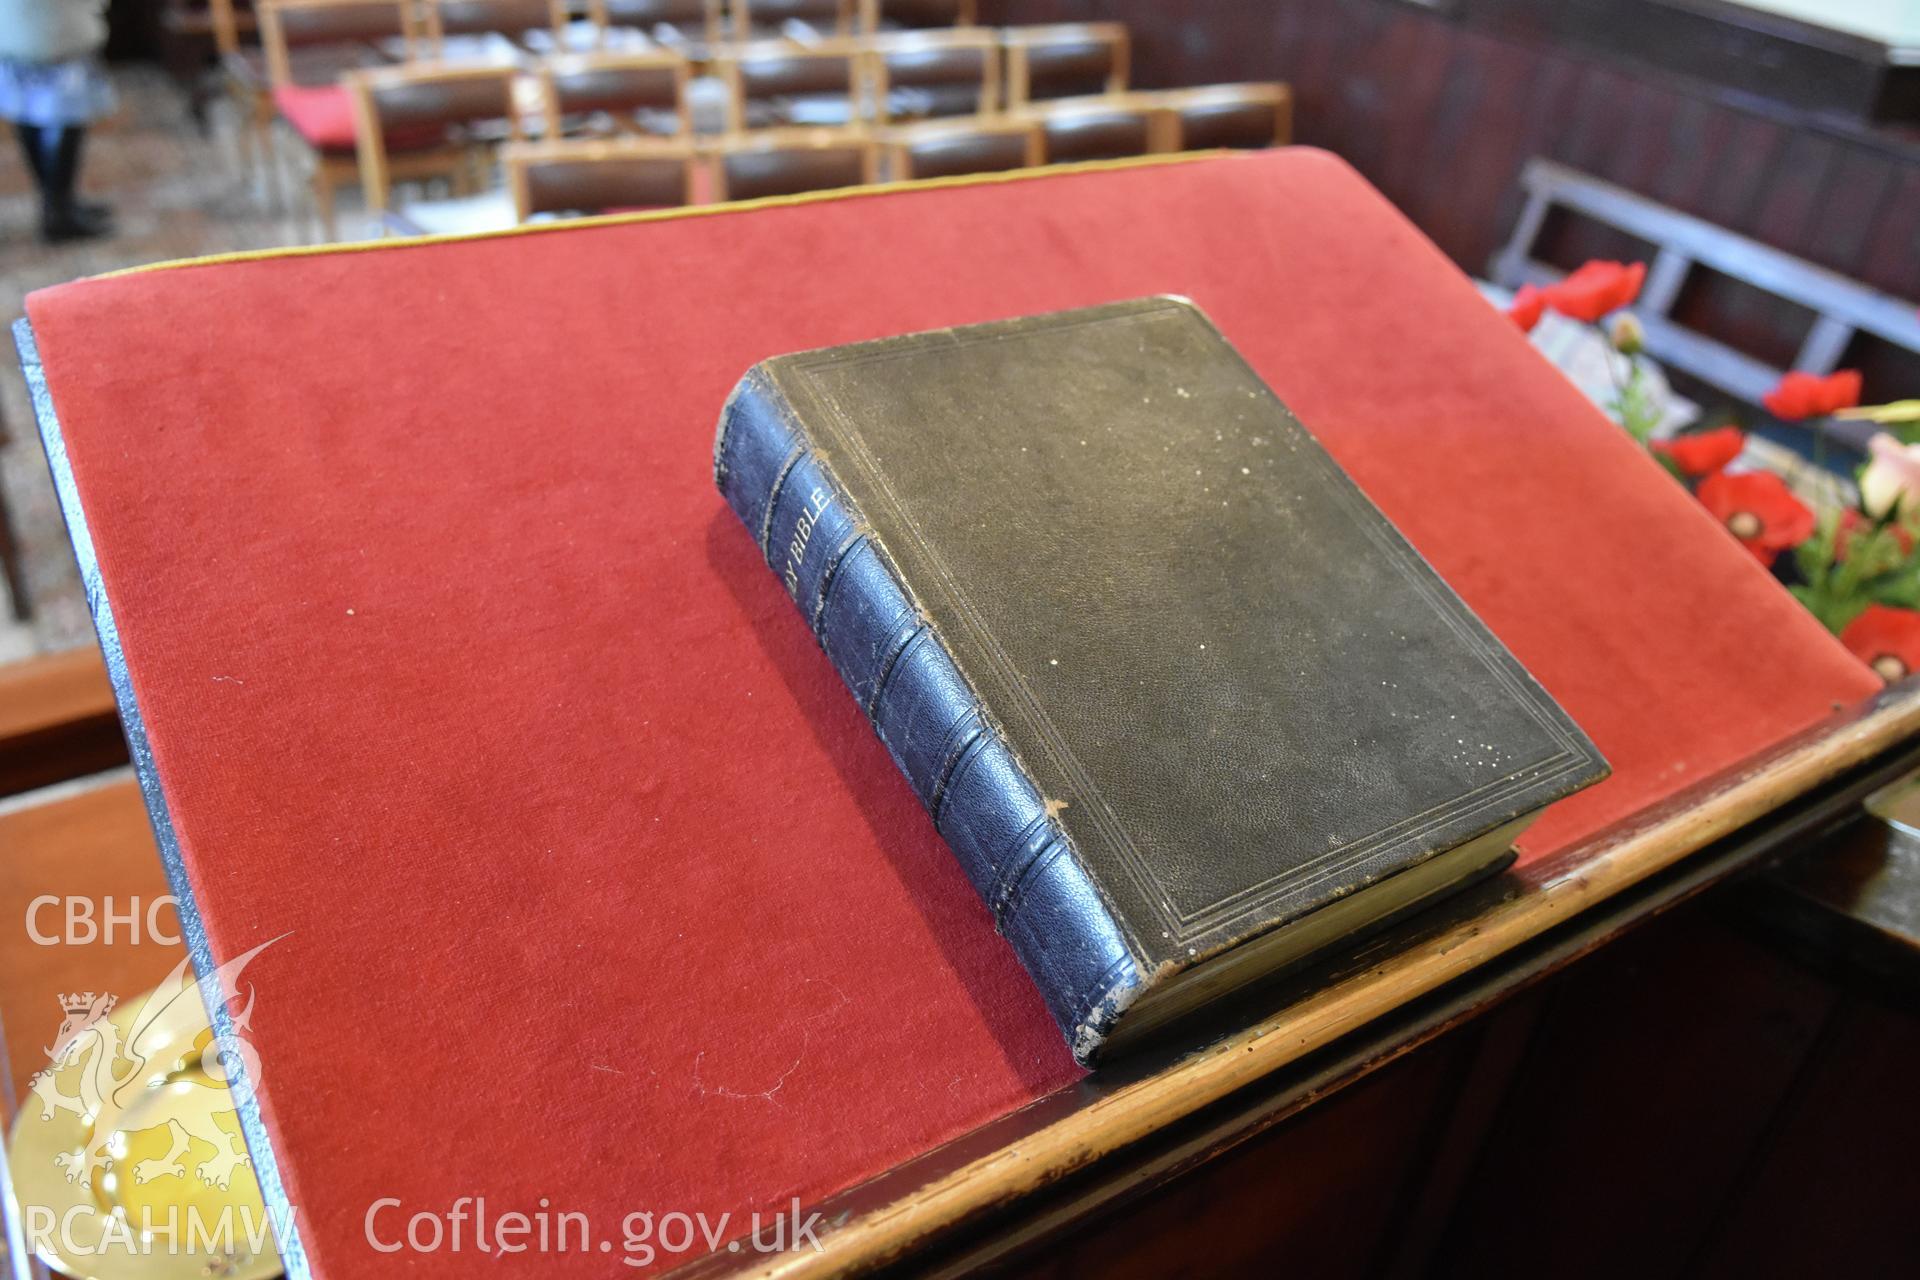 Detailed view of older, leather-bound bible on the pulpit at Hyssington Primitive Methodist Chapel, Hyssington, Churchstoke. Photographic survey conducted by Sue Fielding on 7th December 2018.